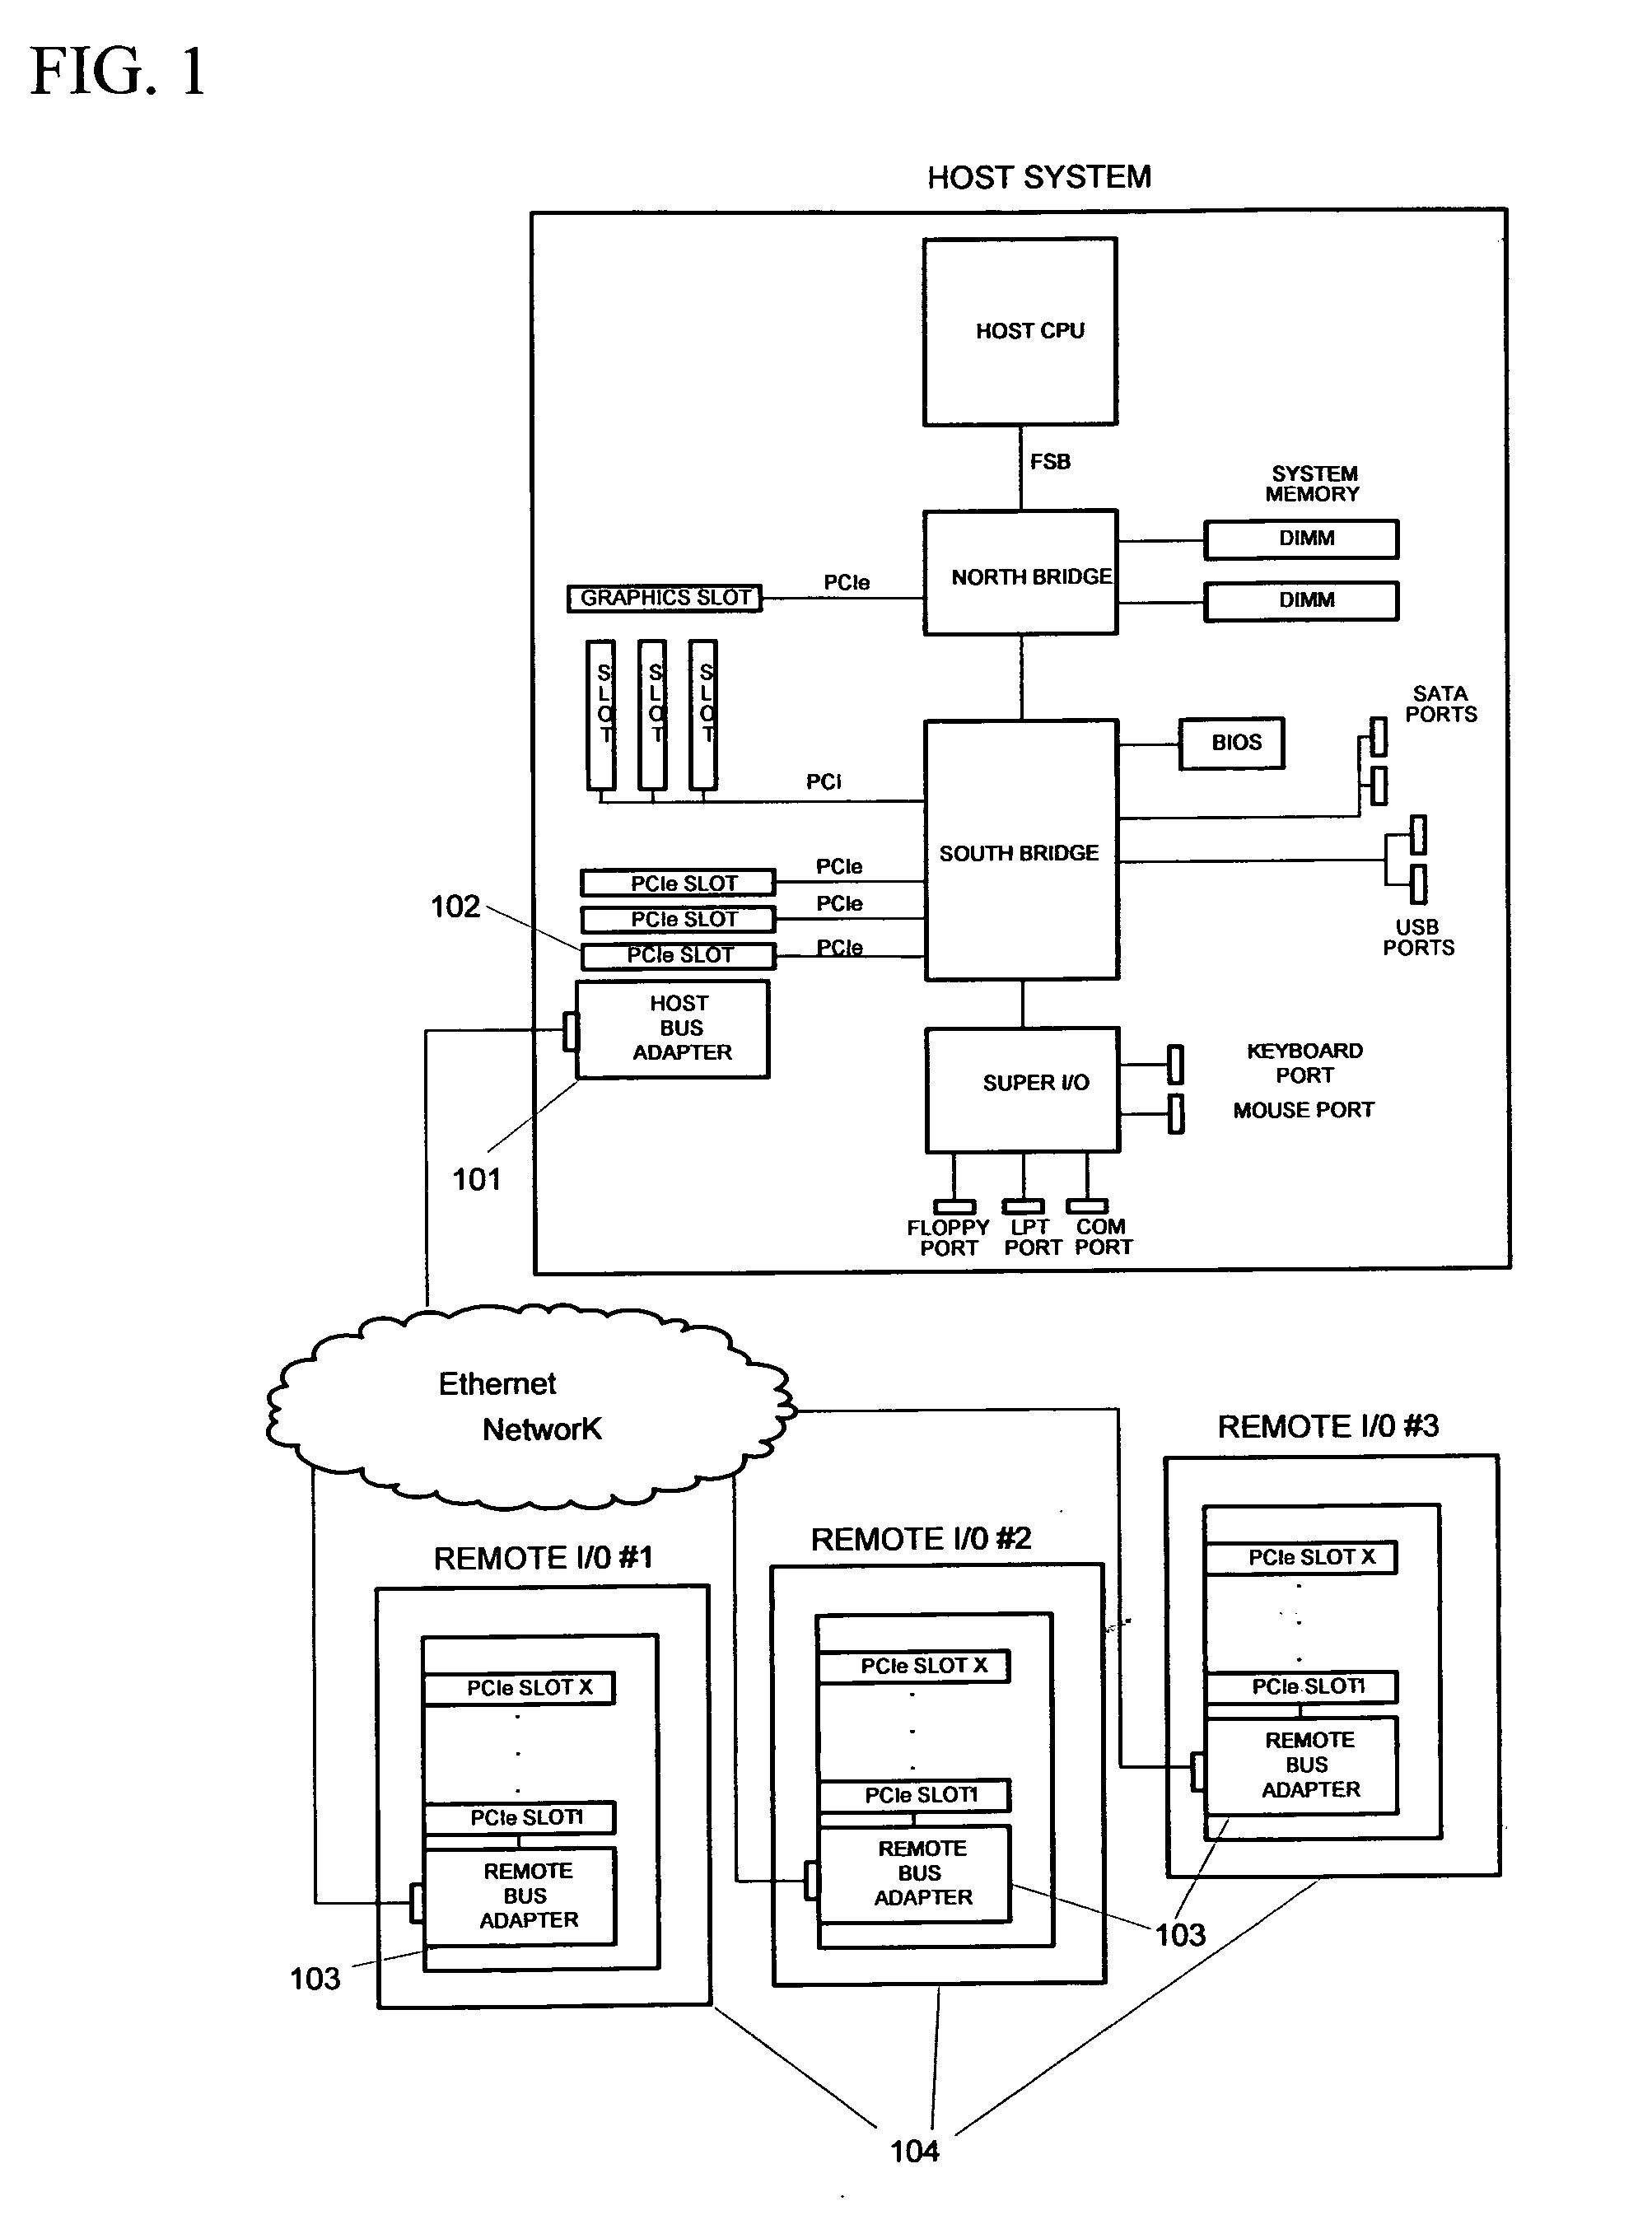 Software-based virtual PCI system